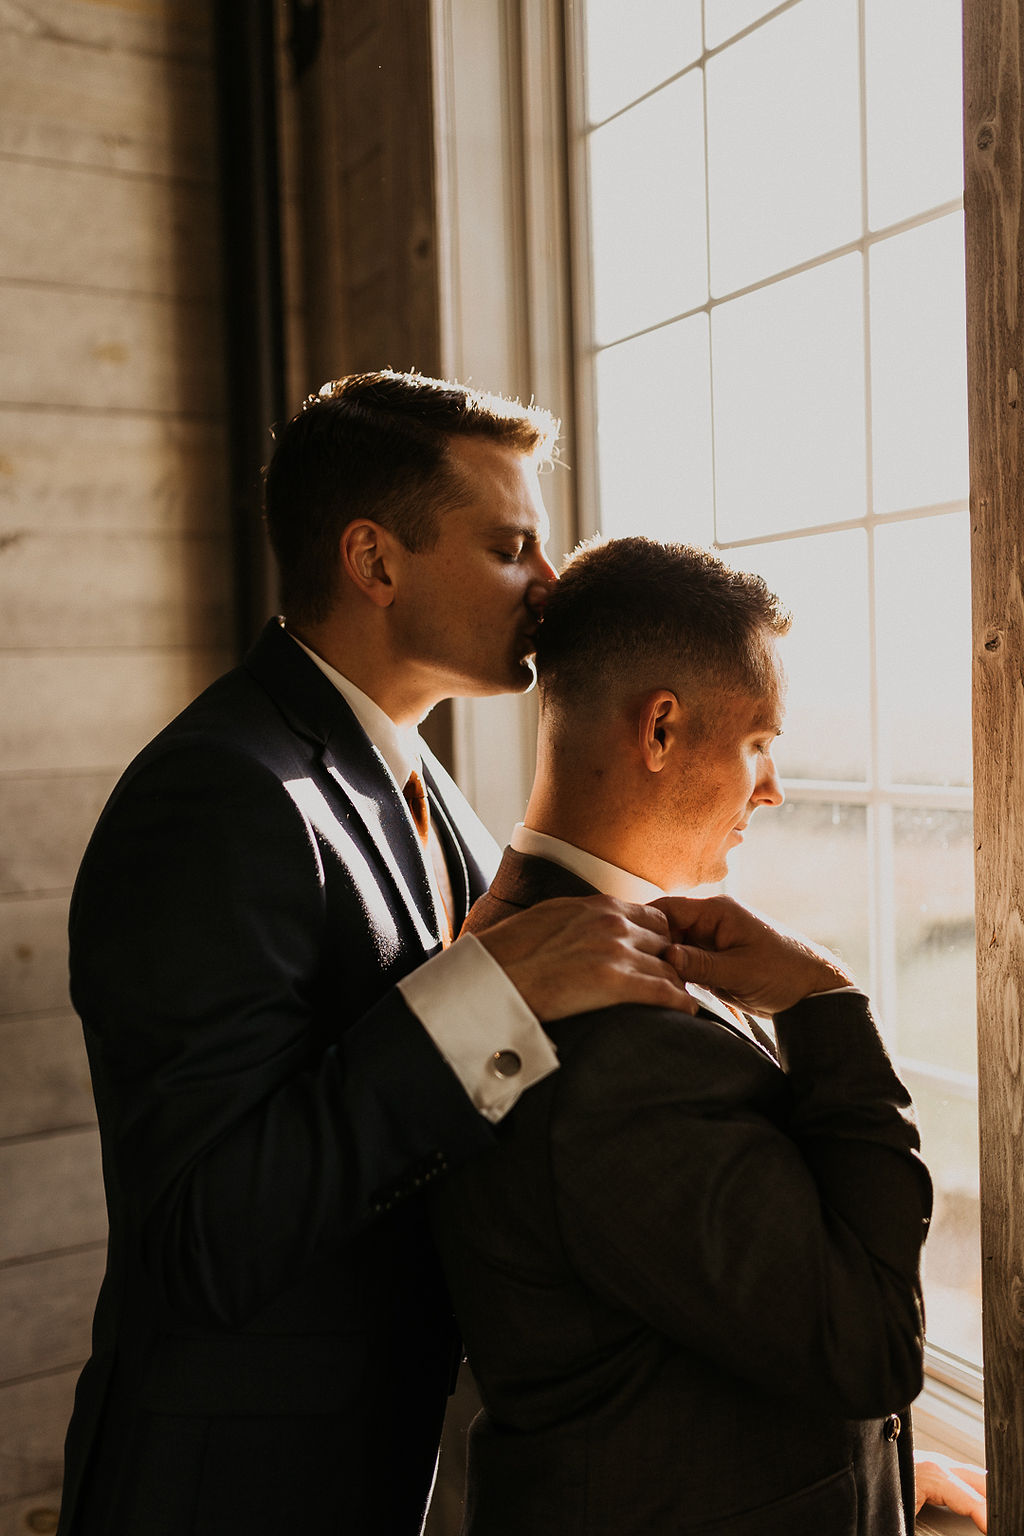 LGBTQ+ couple sharing a moment in front of a window.